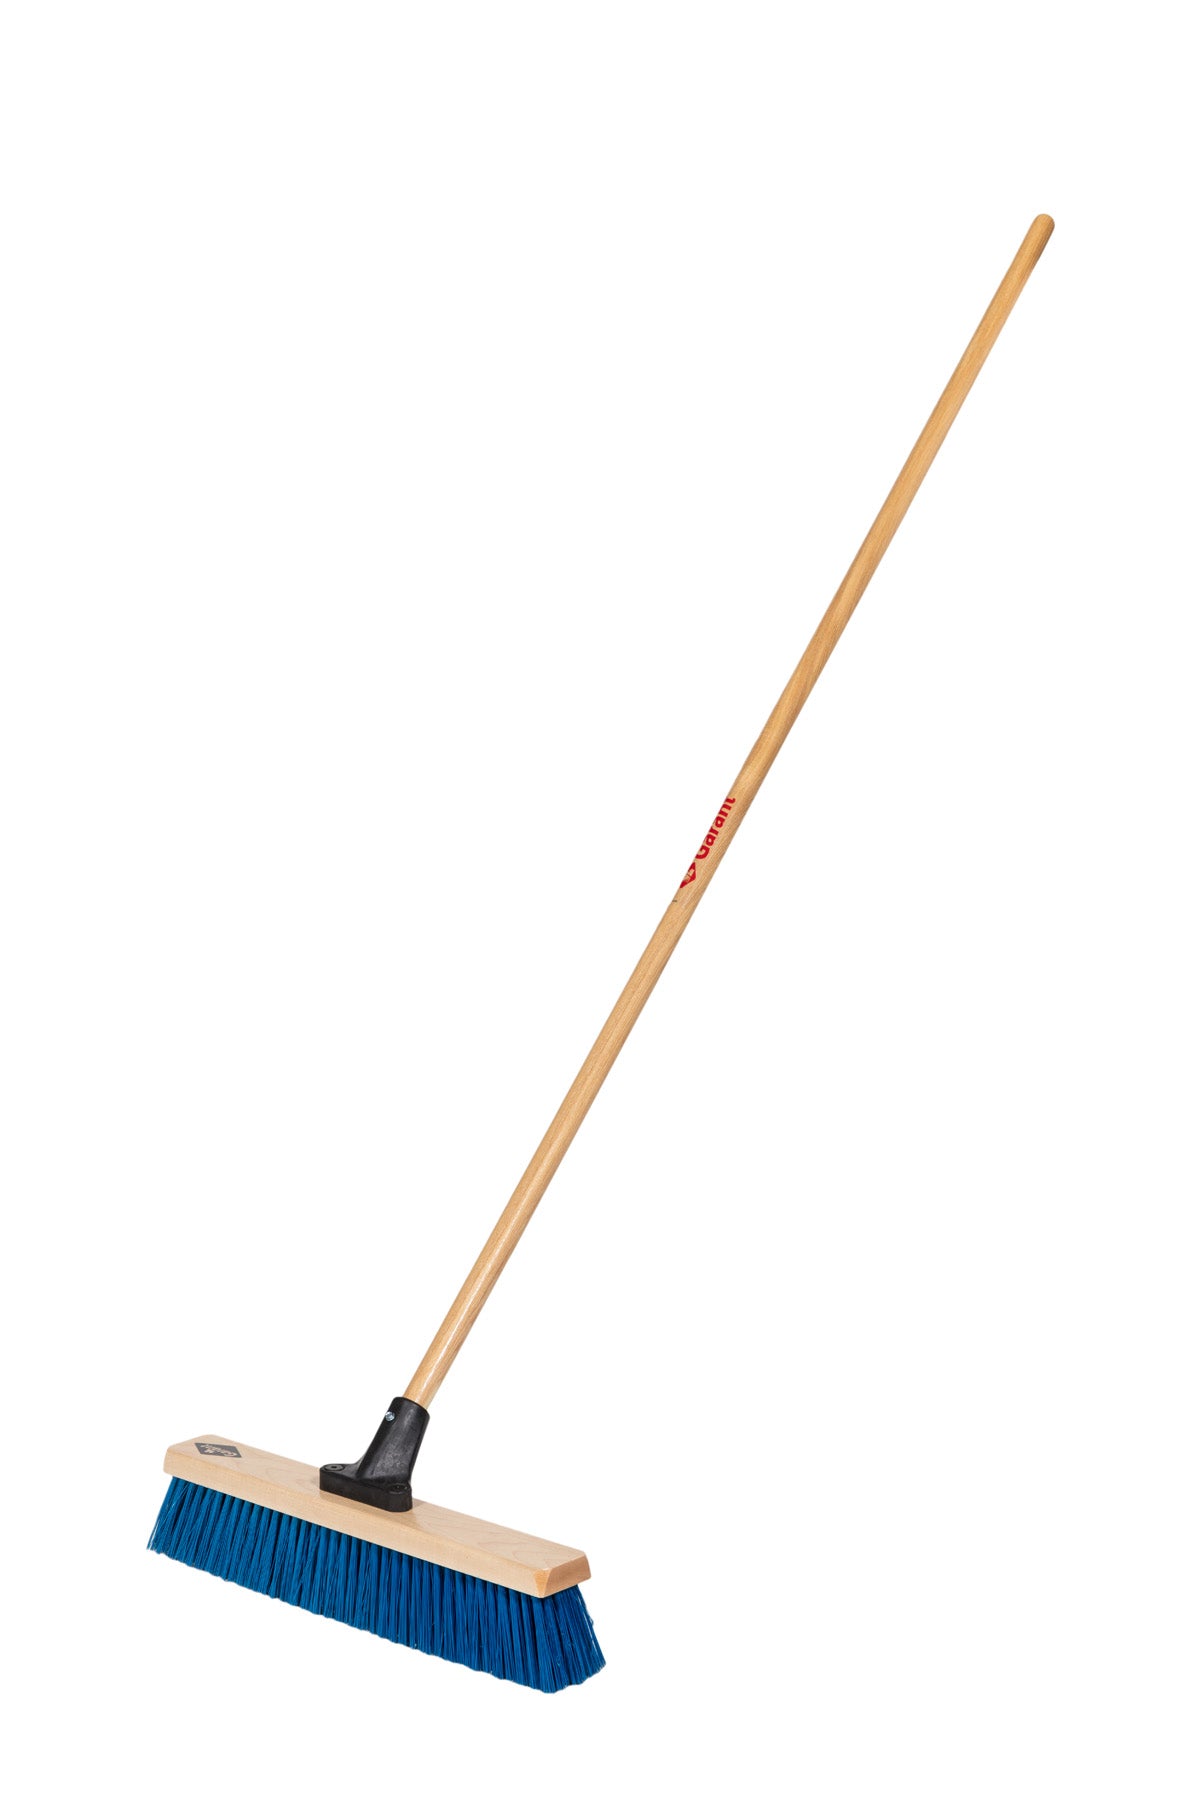 Contractor push broom, 18", rough surface